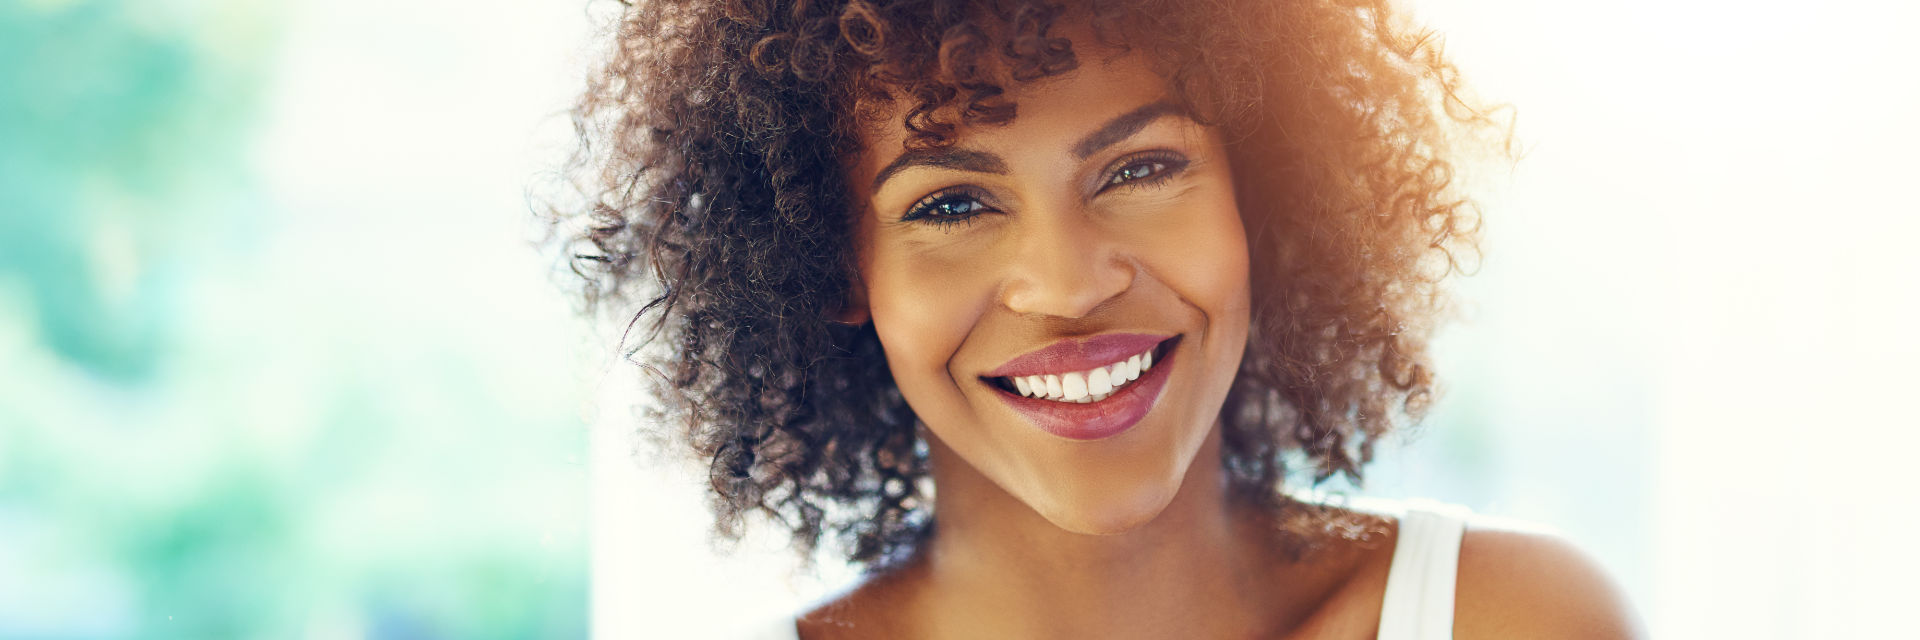 A beautiful Afro-American woman with a perfect smile.